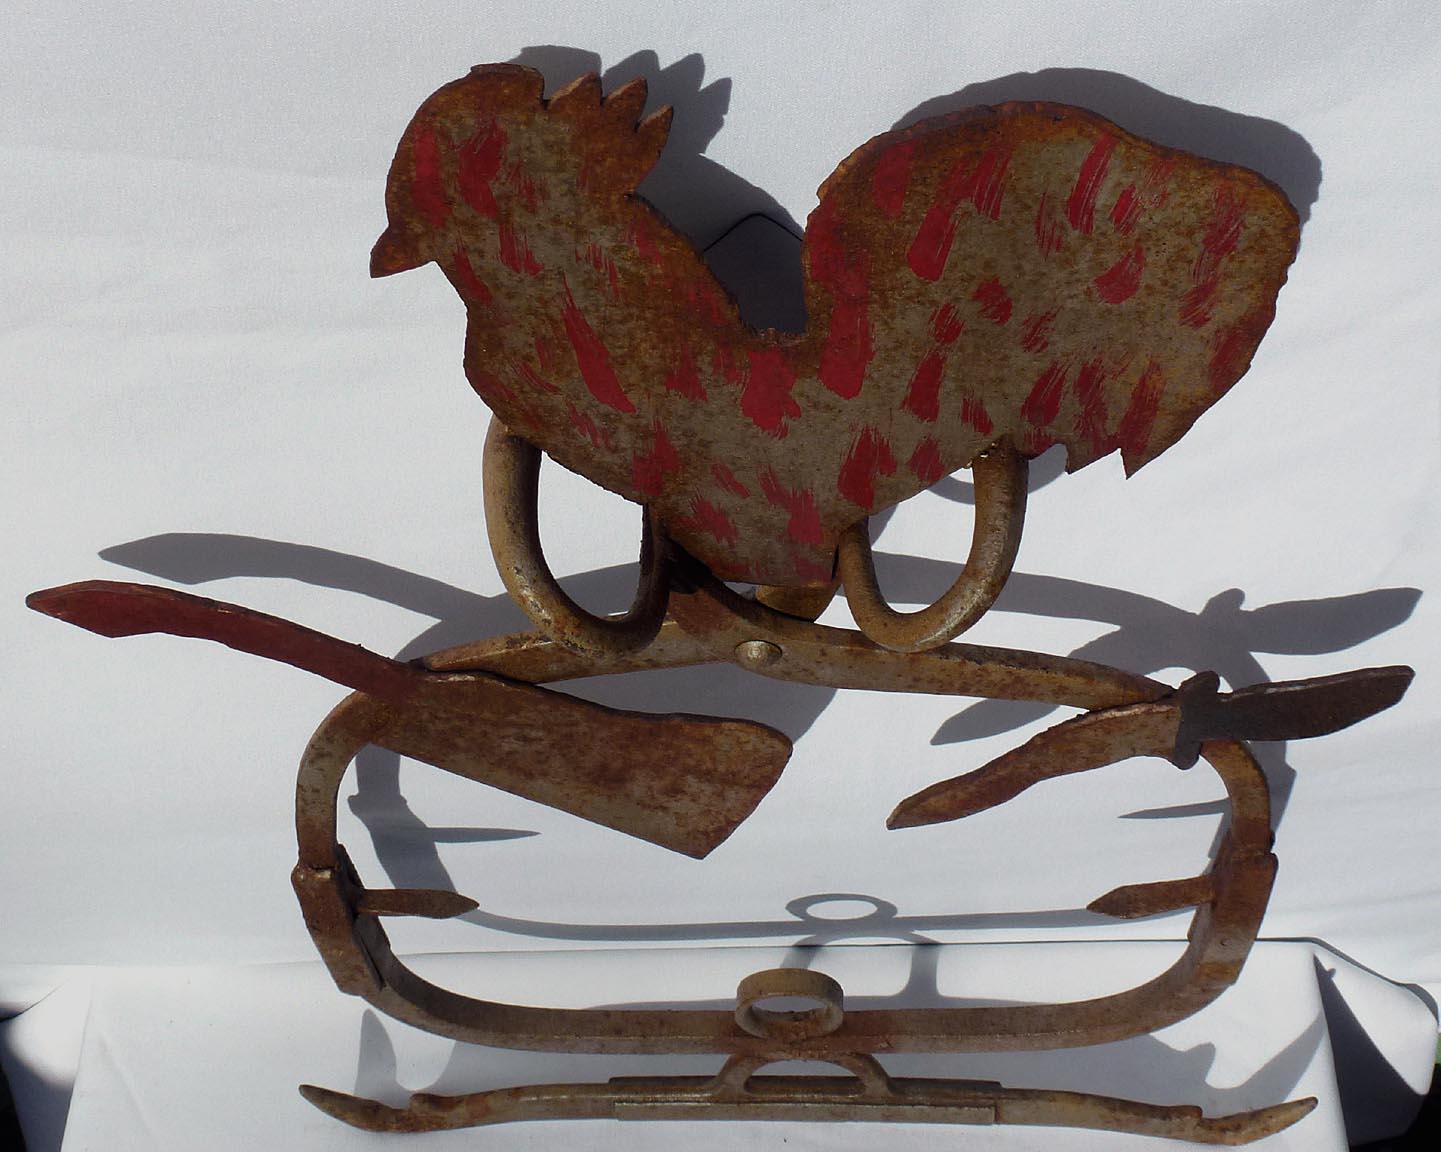 This is a folky butcher's trade sign. It is hand made from metal tools and found objects, with a sheet metal rooster on top. Ice tongs form part of the frame. It has worn silver paint with areas of surface rust. Red and black decoration was added on